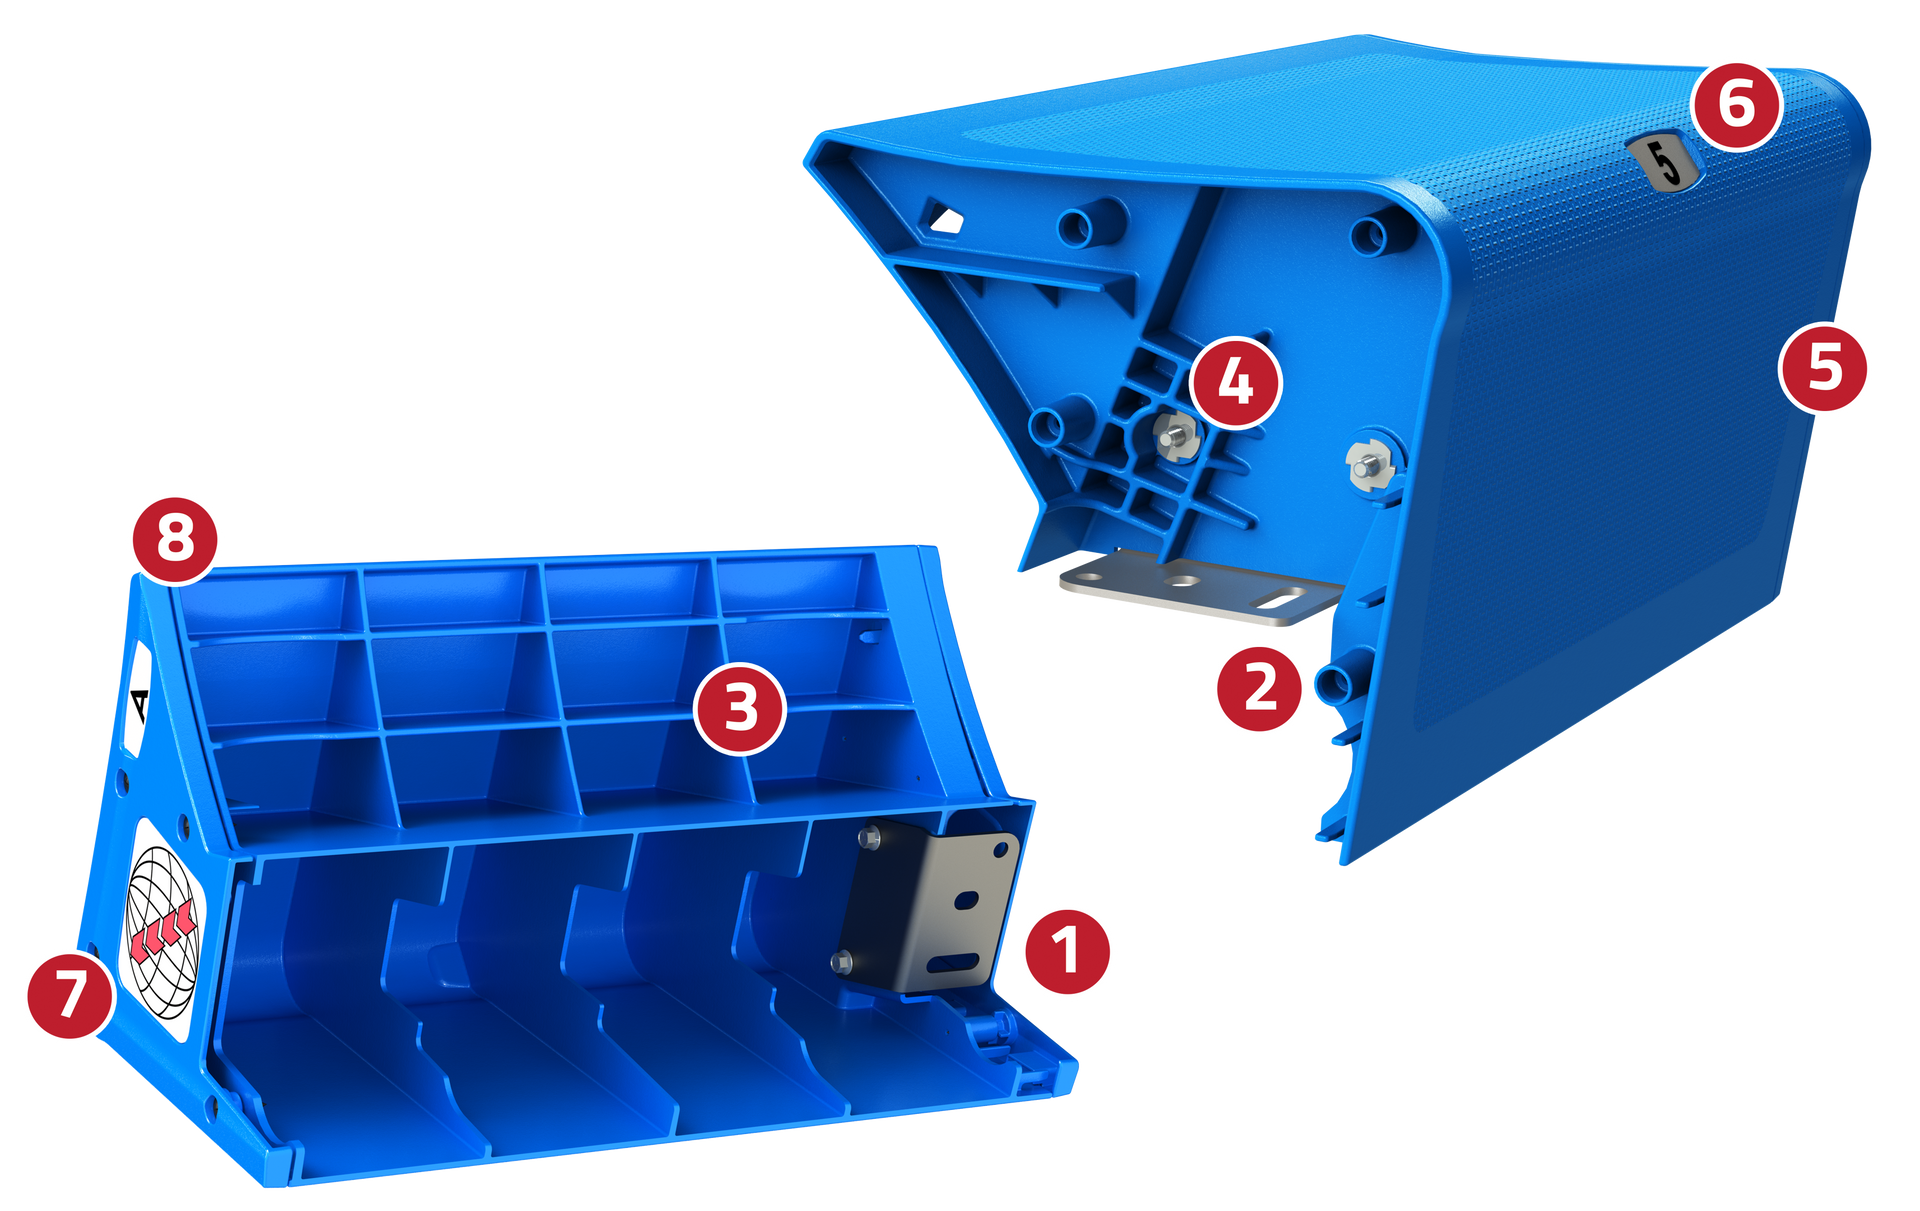 Interkal Excel Seat Module (ESM) features and benefits